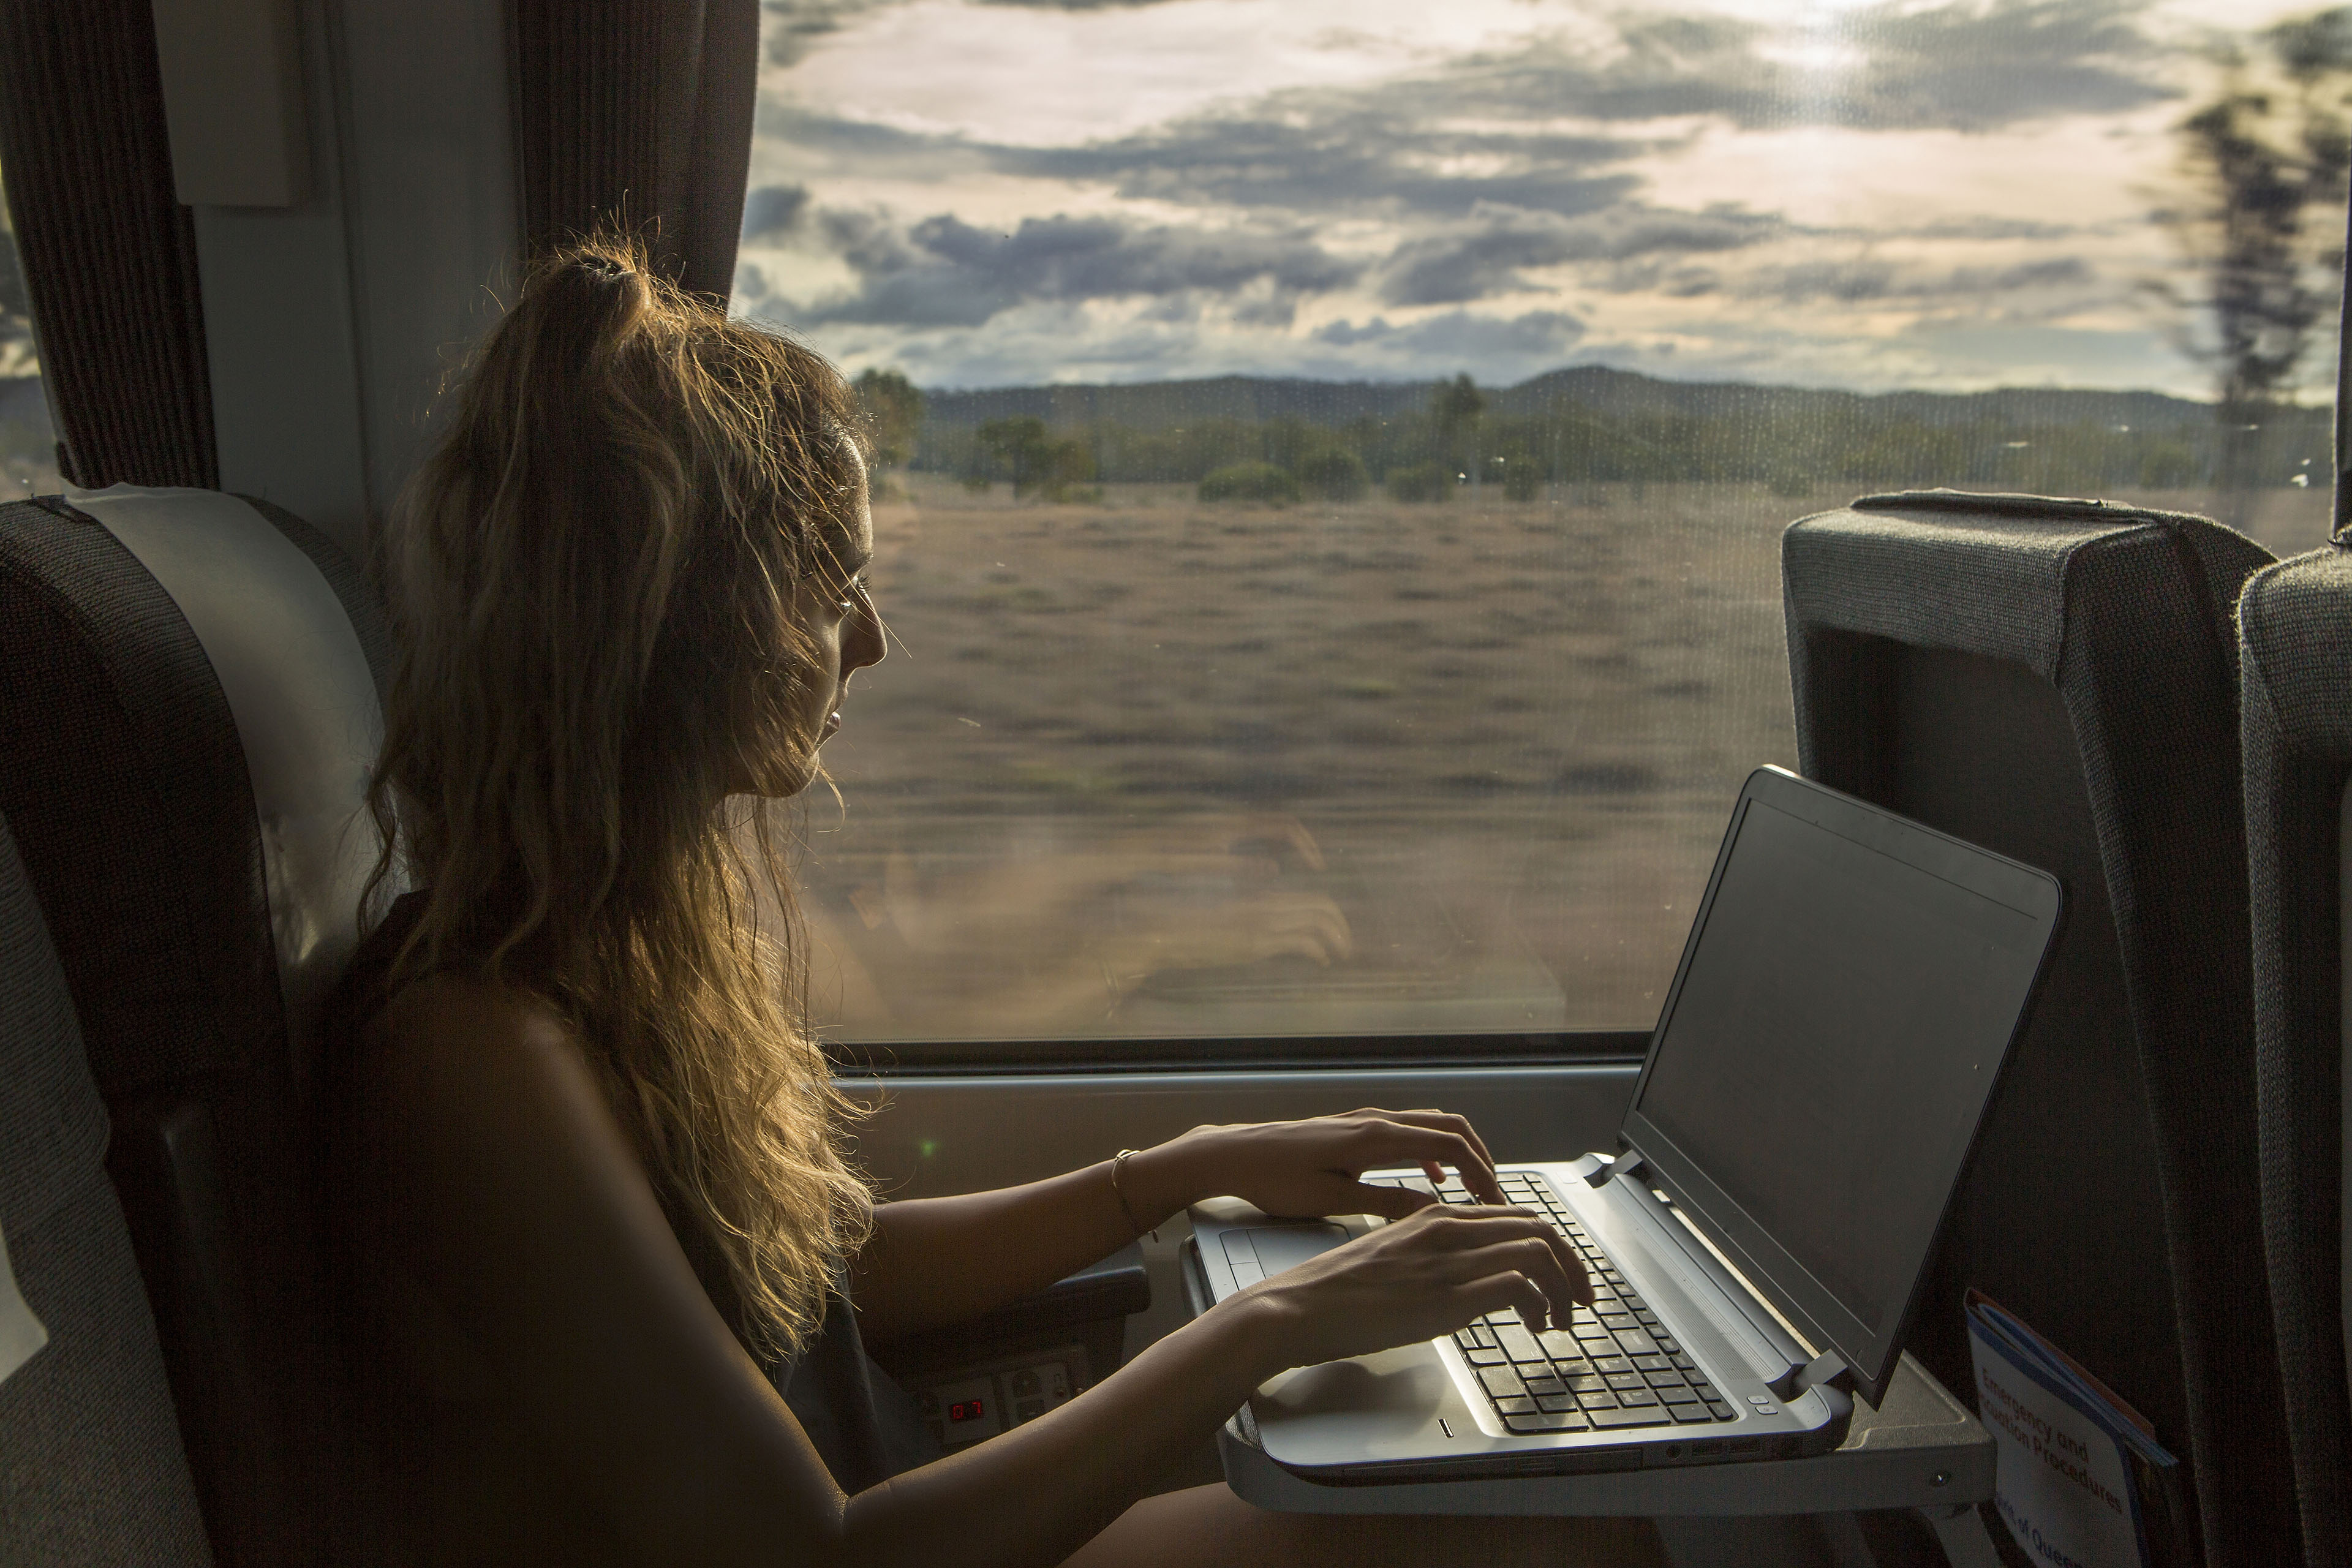 A woman works on her laptop while traveling on a train